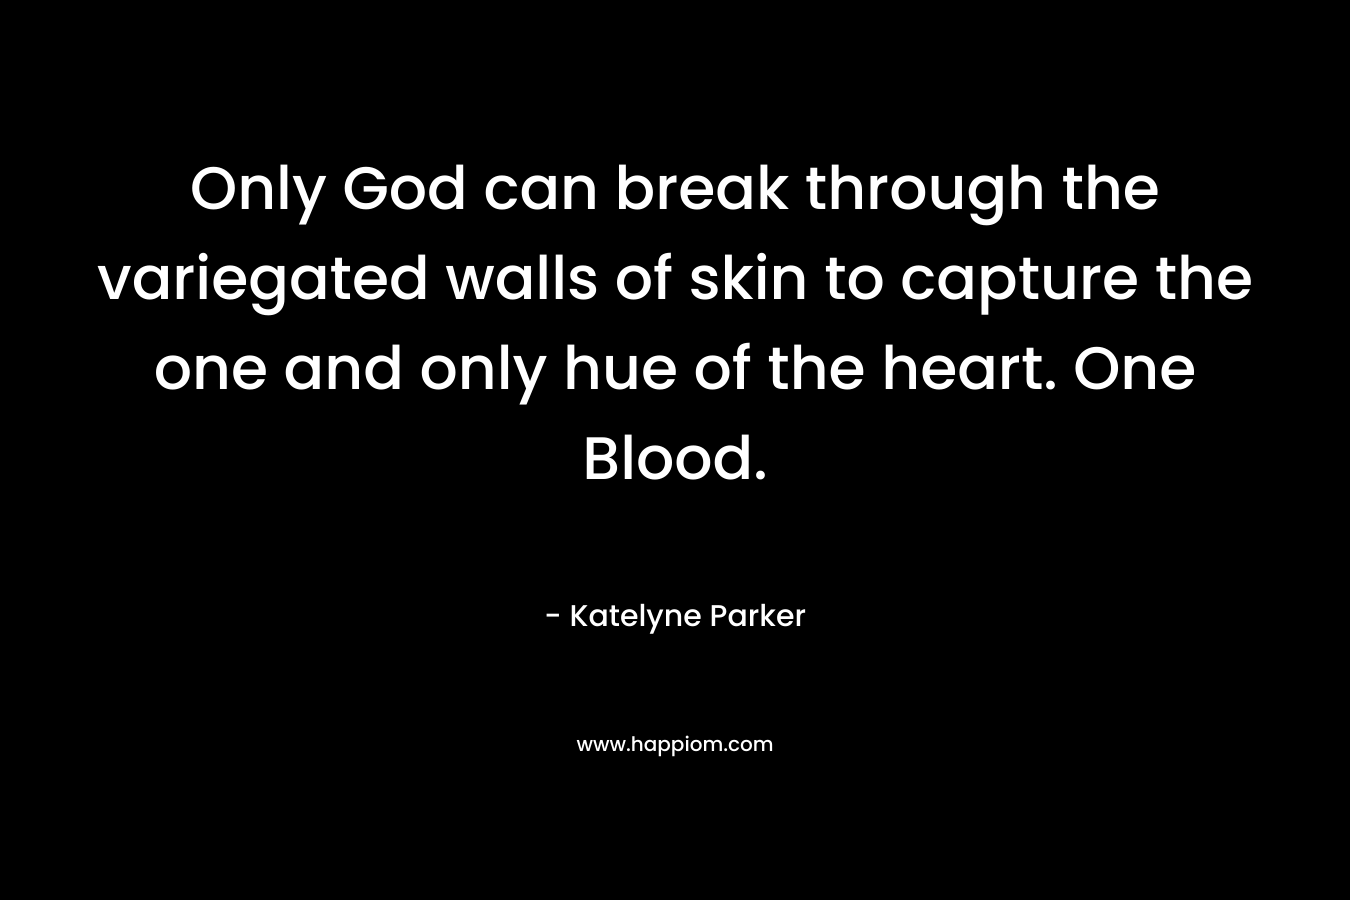 Only God can break through the variegated walls of skin to capture the one and only hue of the heart. One Blood. – Katelyne Parker